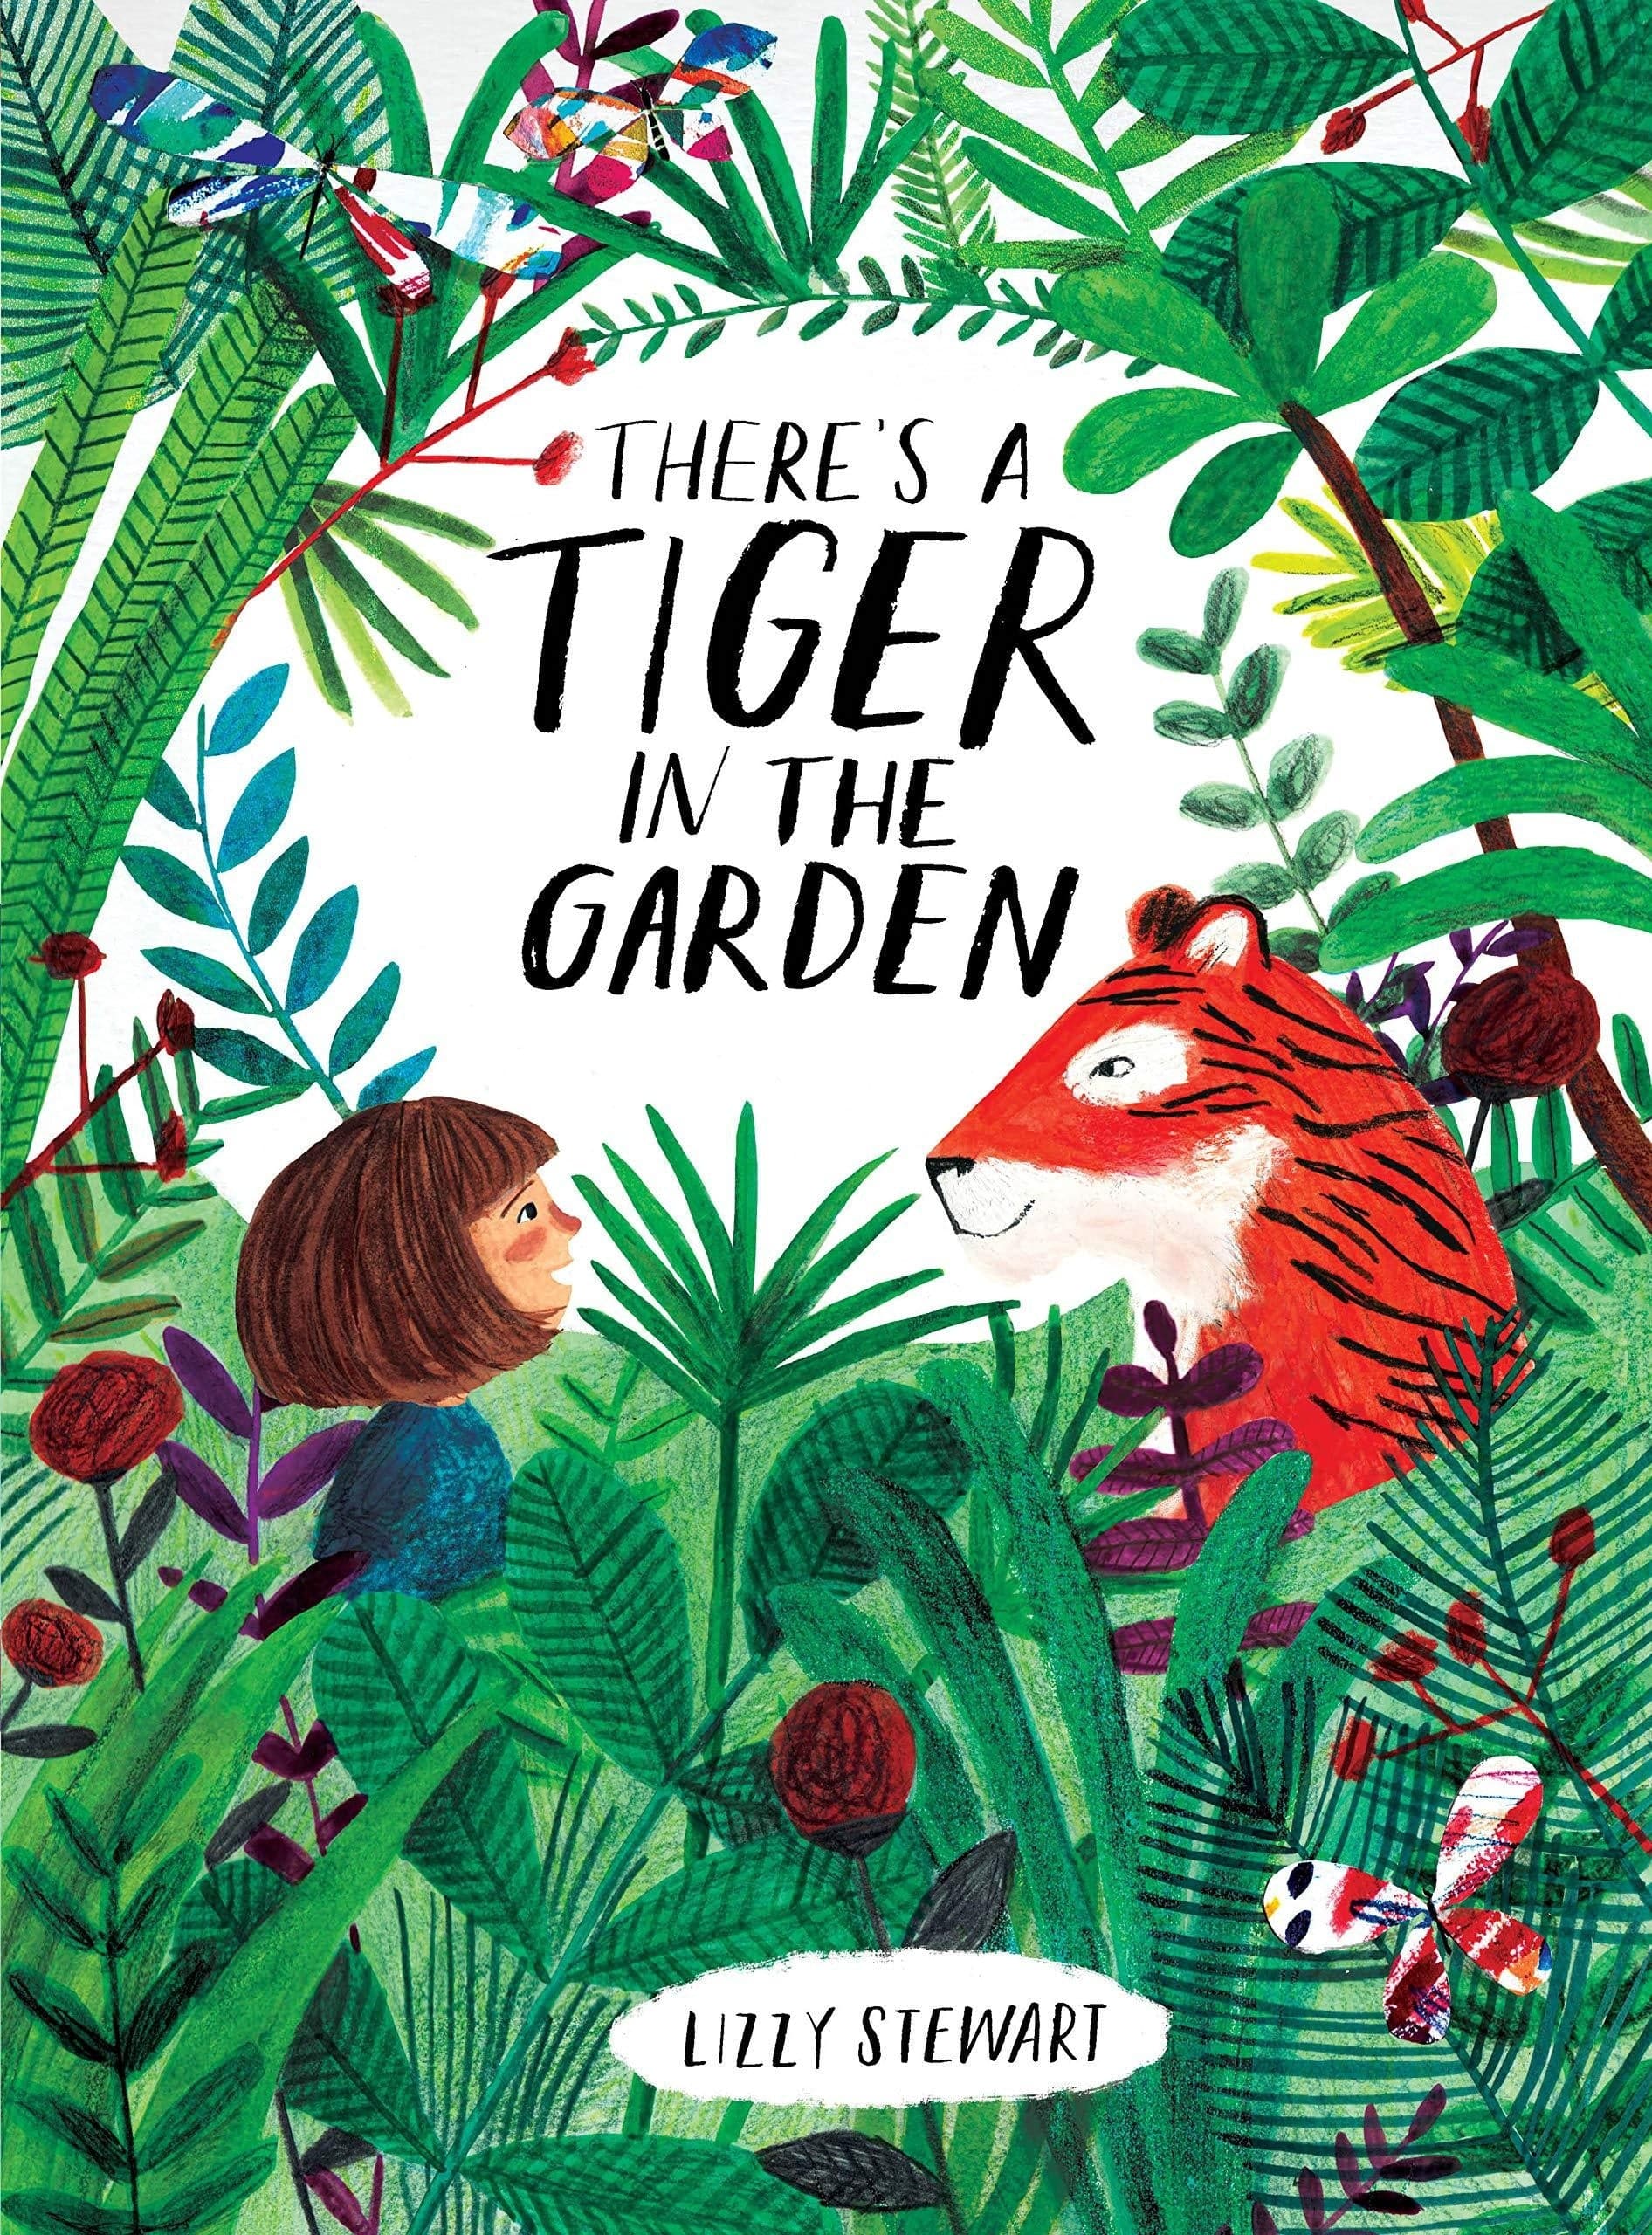 Book Bag Doha  There's a Tiger in the Garden by Lizzy Stewart